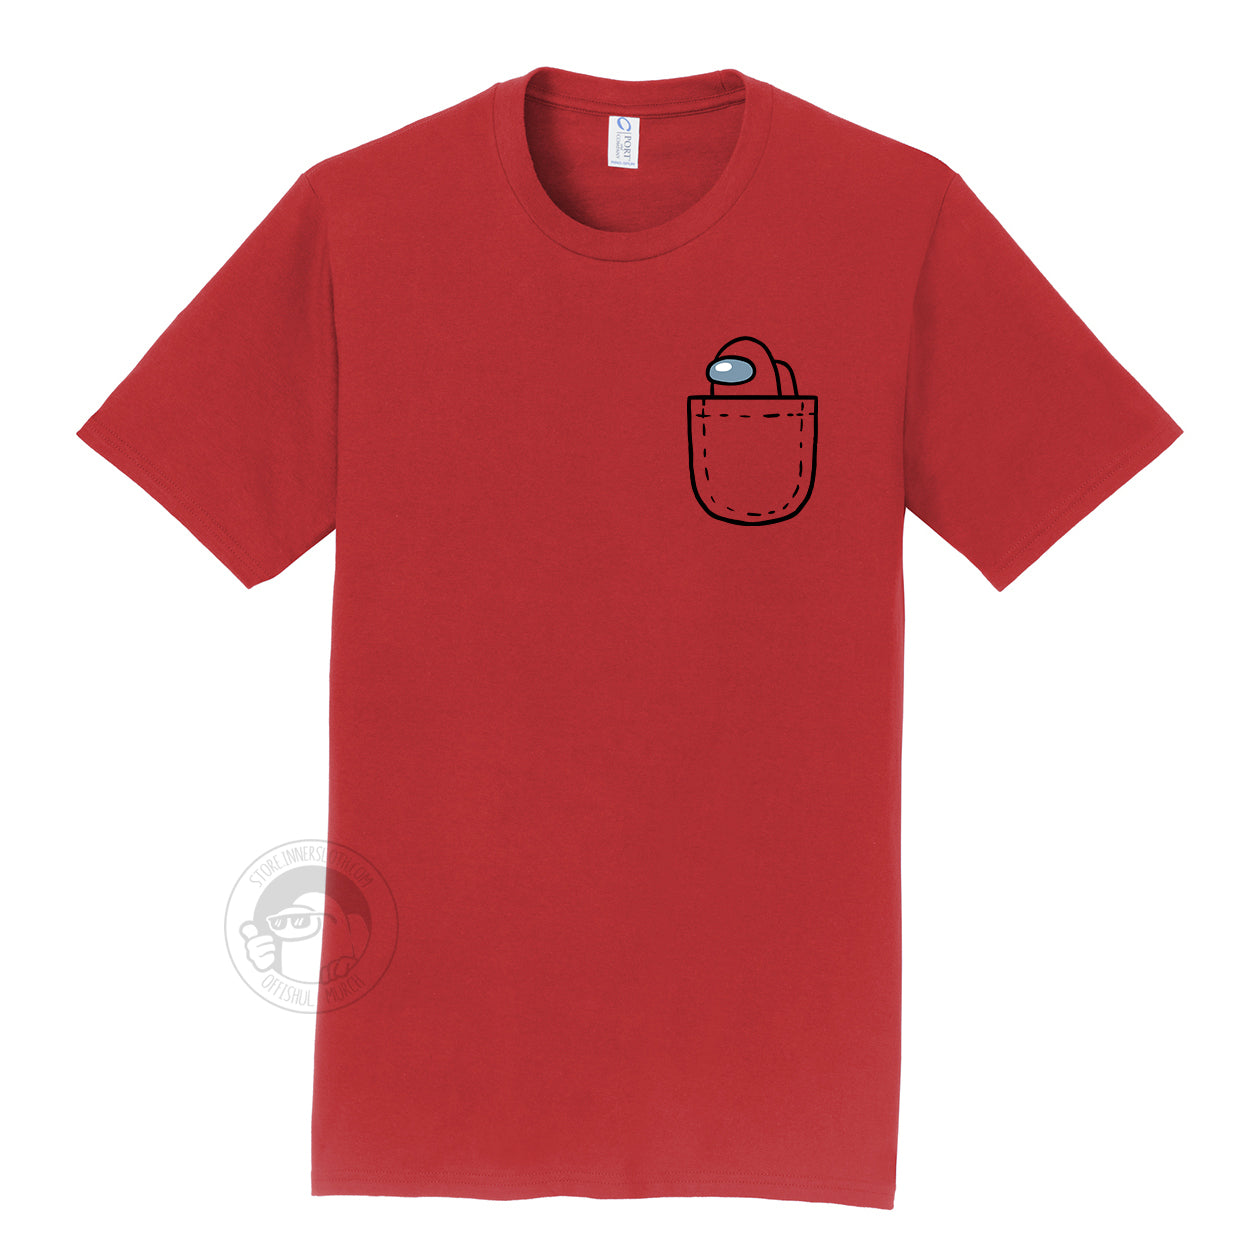 A product photograph of the Among Us: Mini Crewmate Pocket Tee in red. The shirt art depicts a fake pocket and a small crewmate peeking out of it. The crewmate is the same color as the rest of the shirt. 